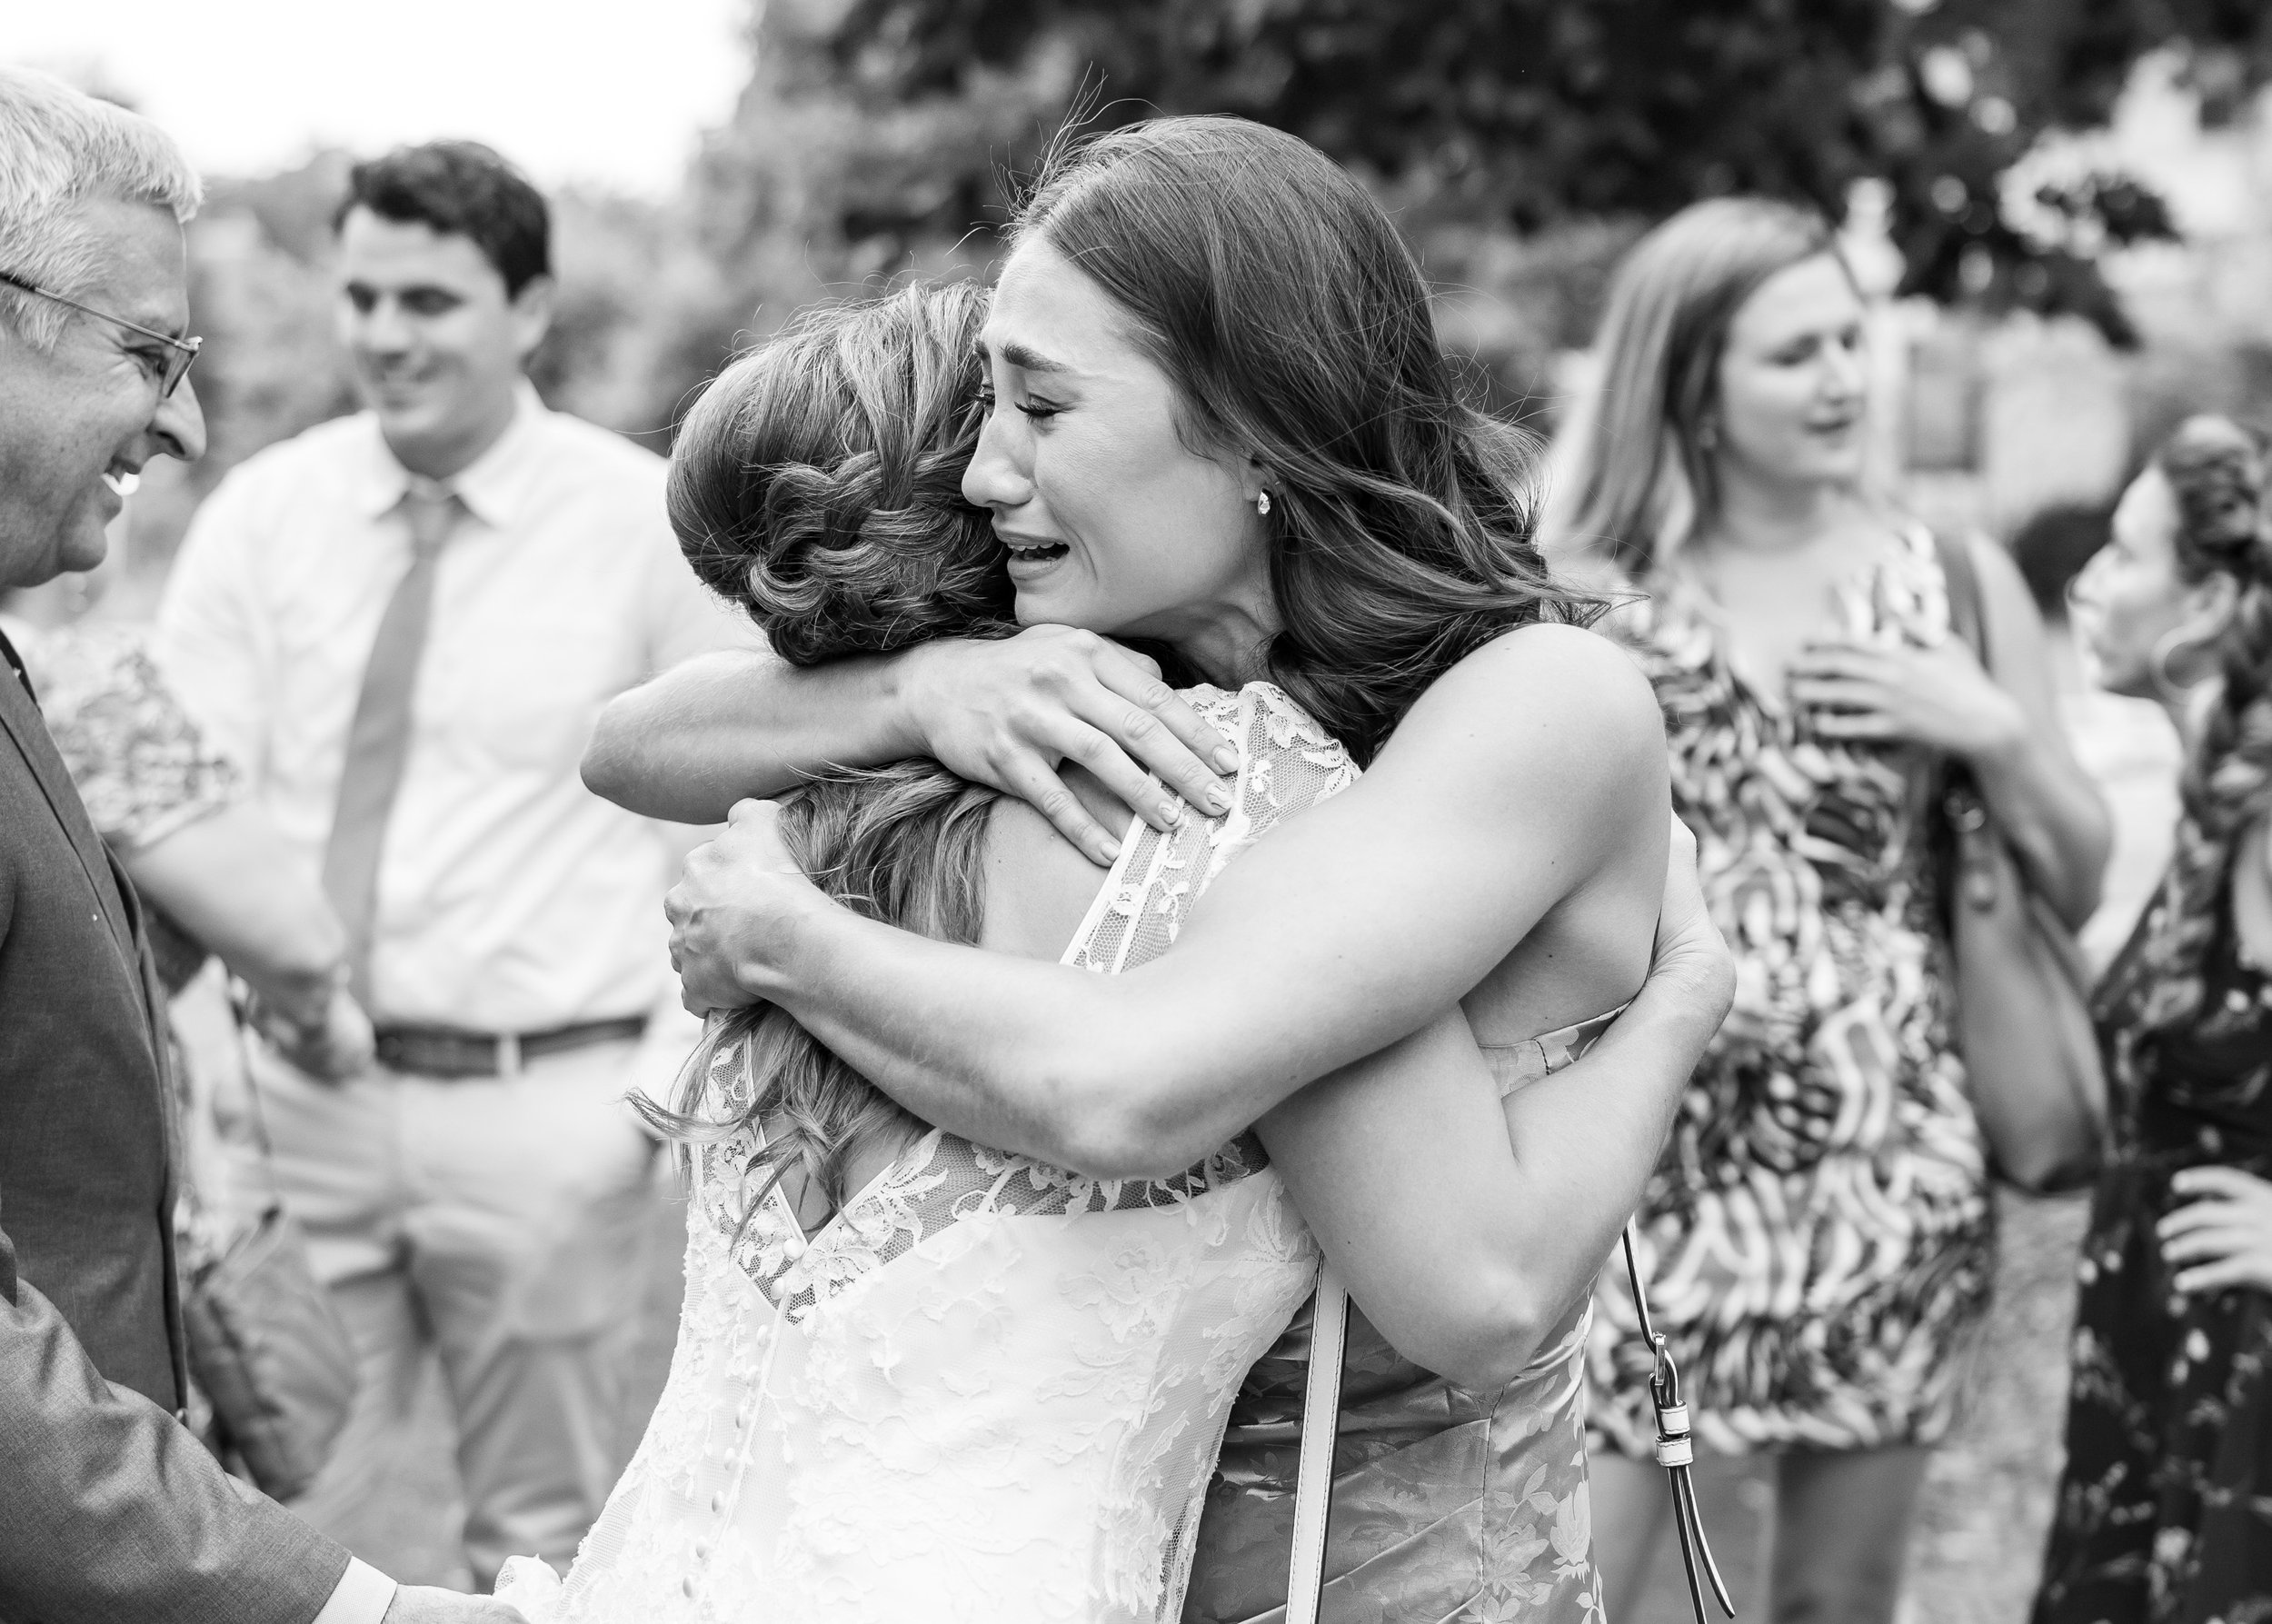 Friend hugging bride and crying after the wedding ceremony